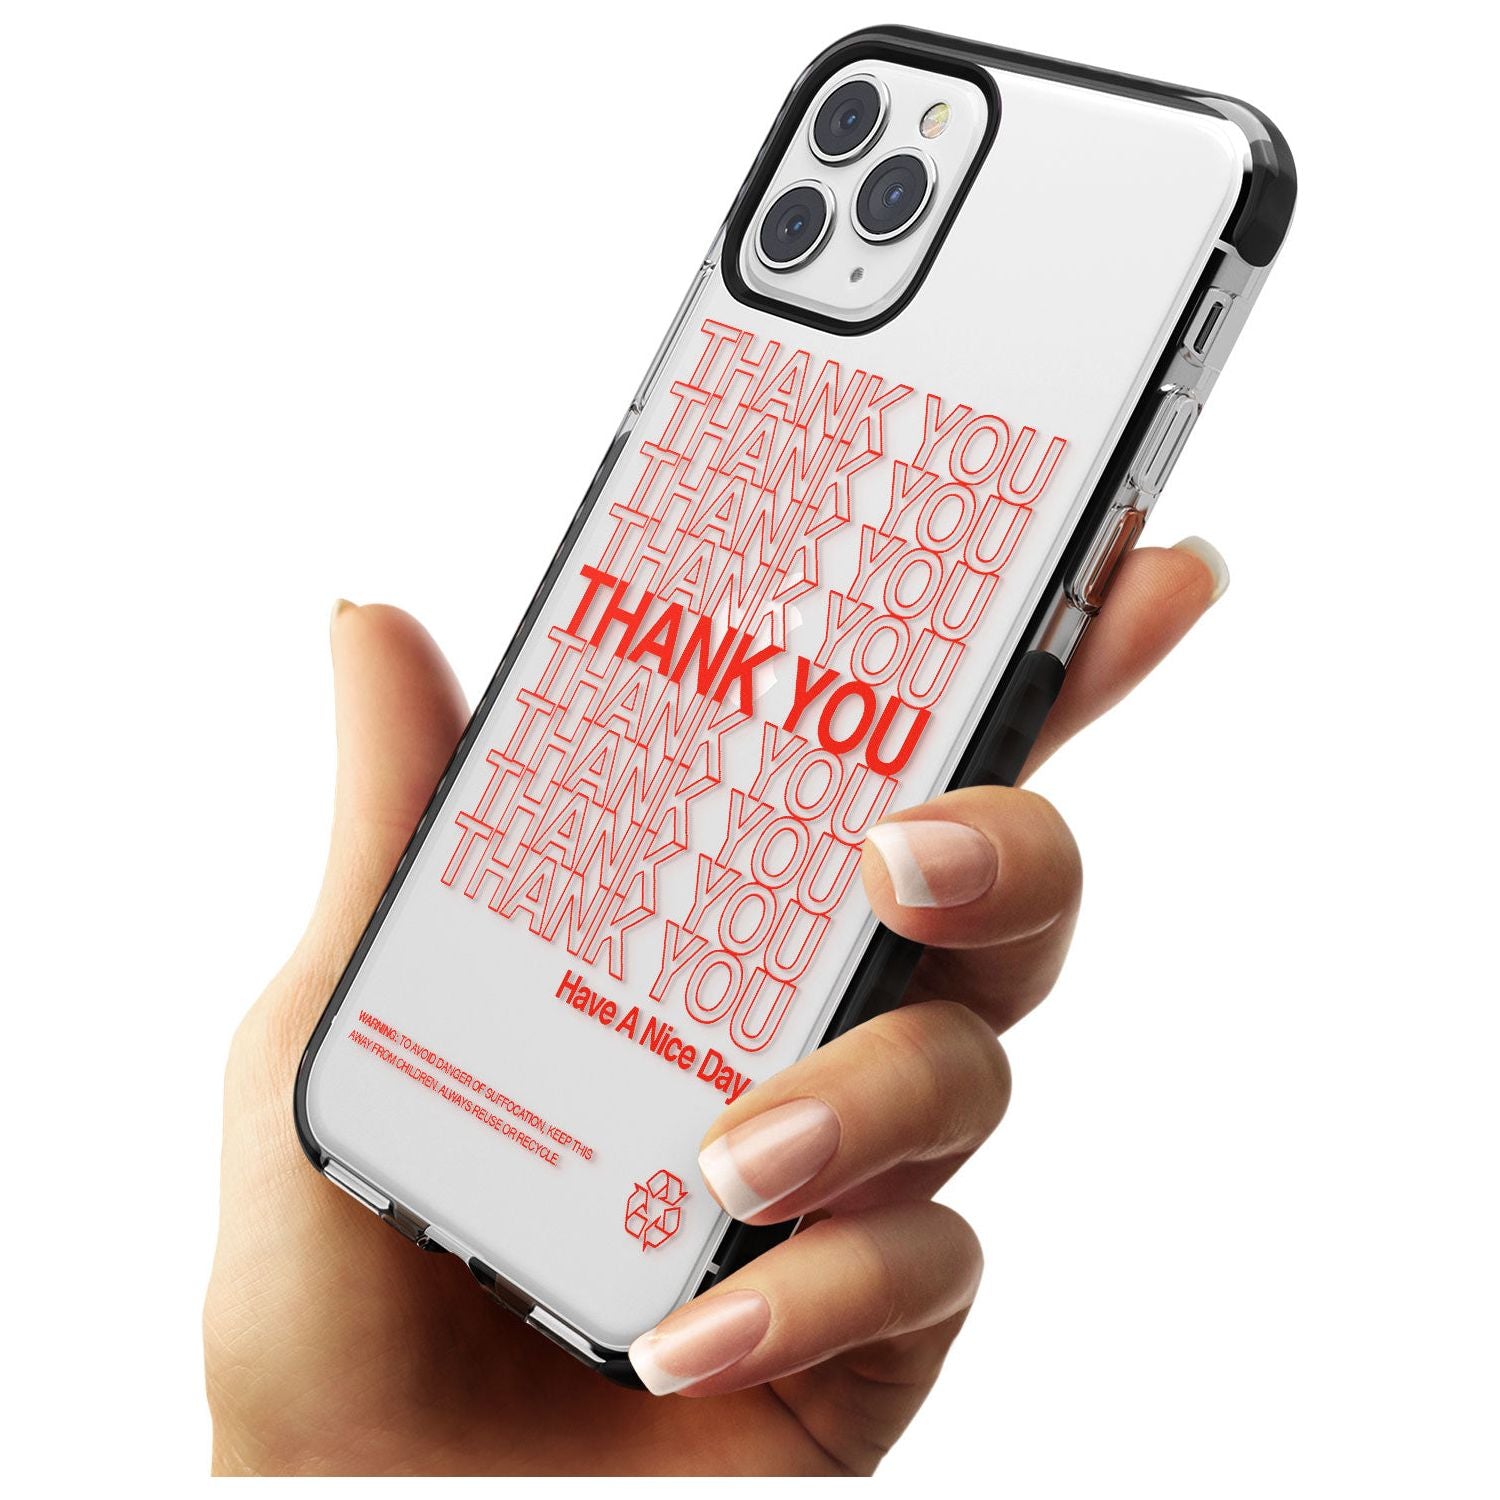 Classic Thank You Bag Design: Solid White + Red Black Impact Phone Case for iPhone 11 Pro Max